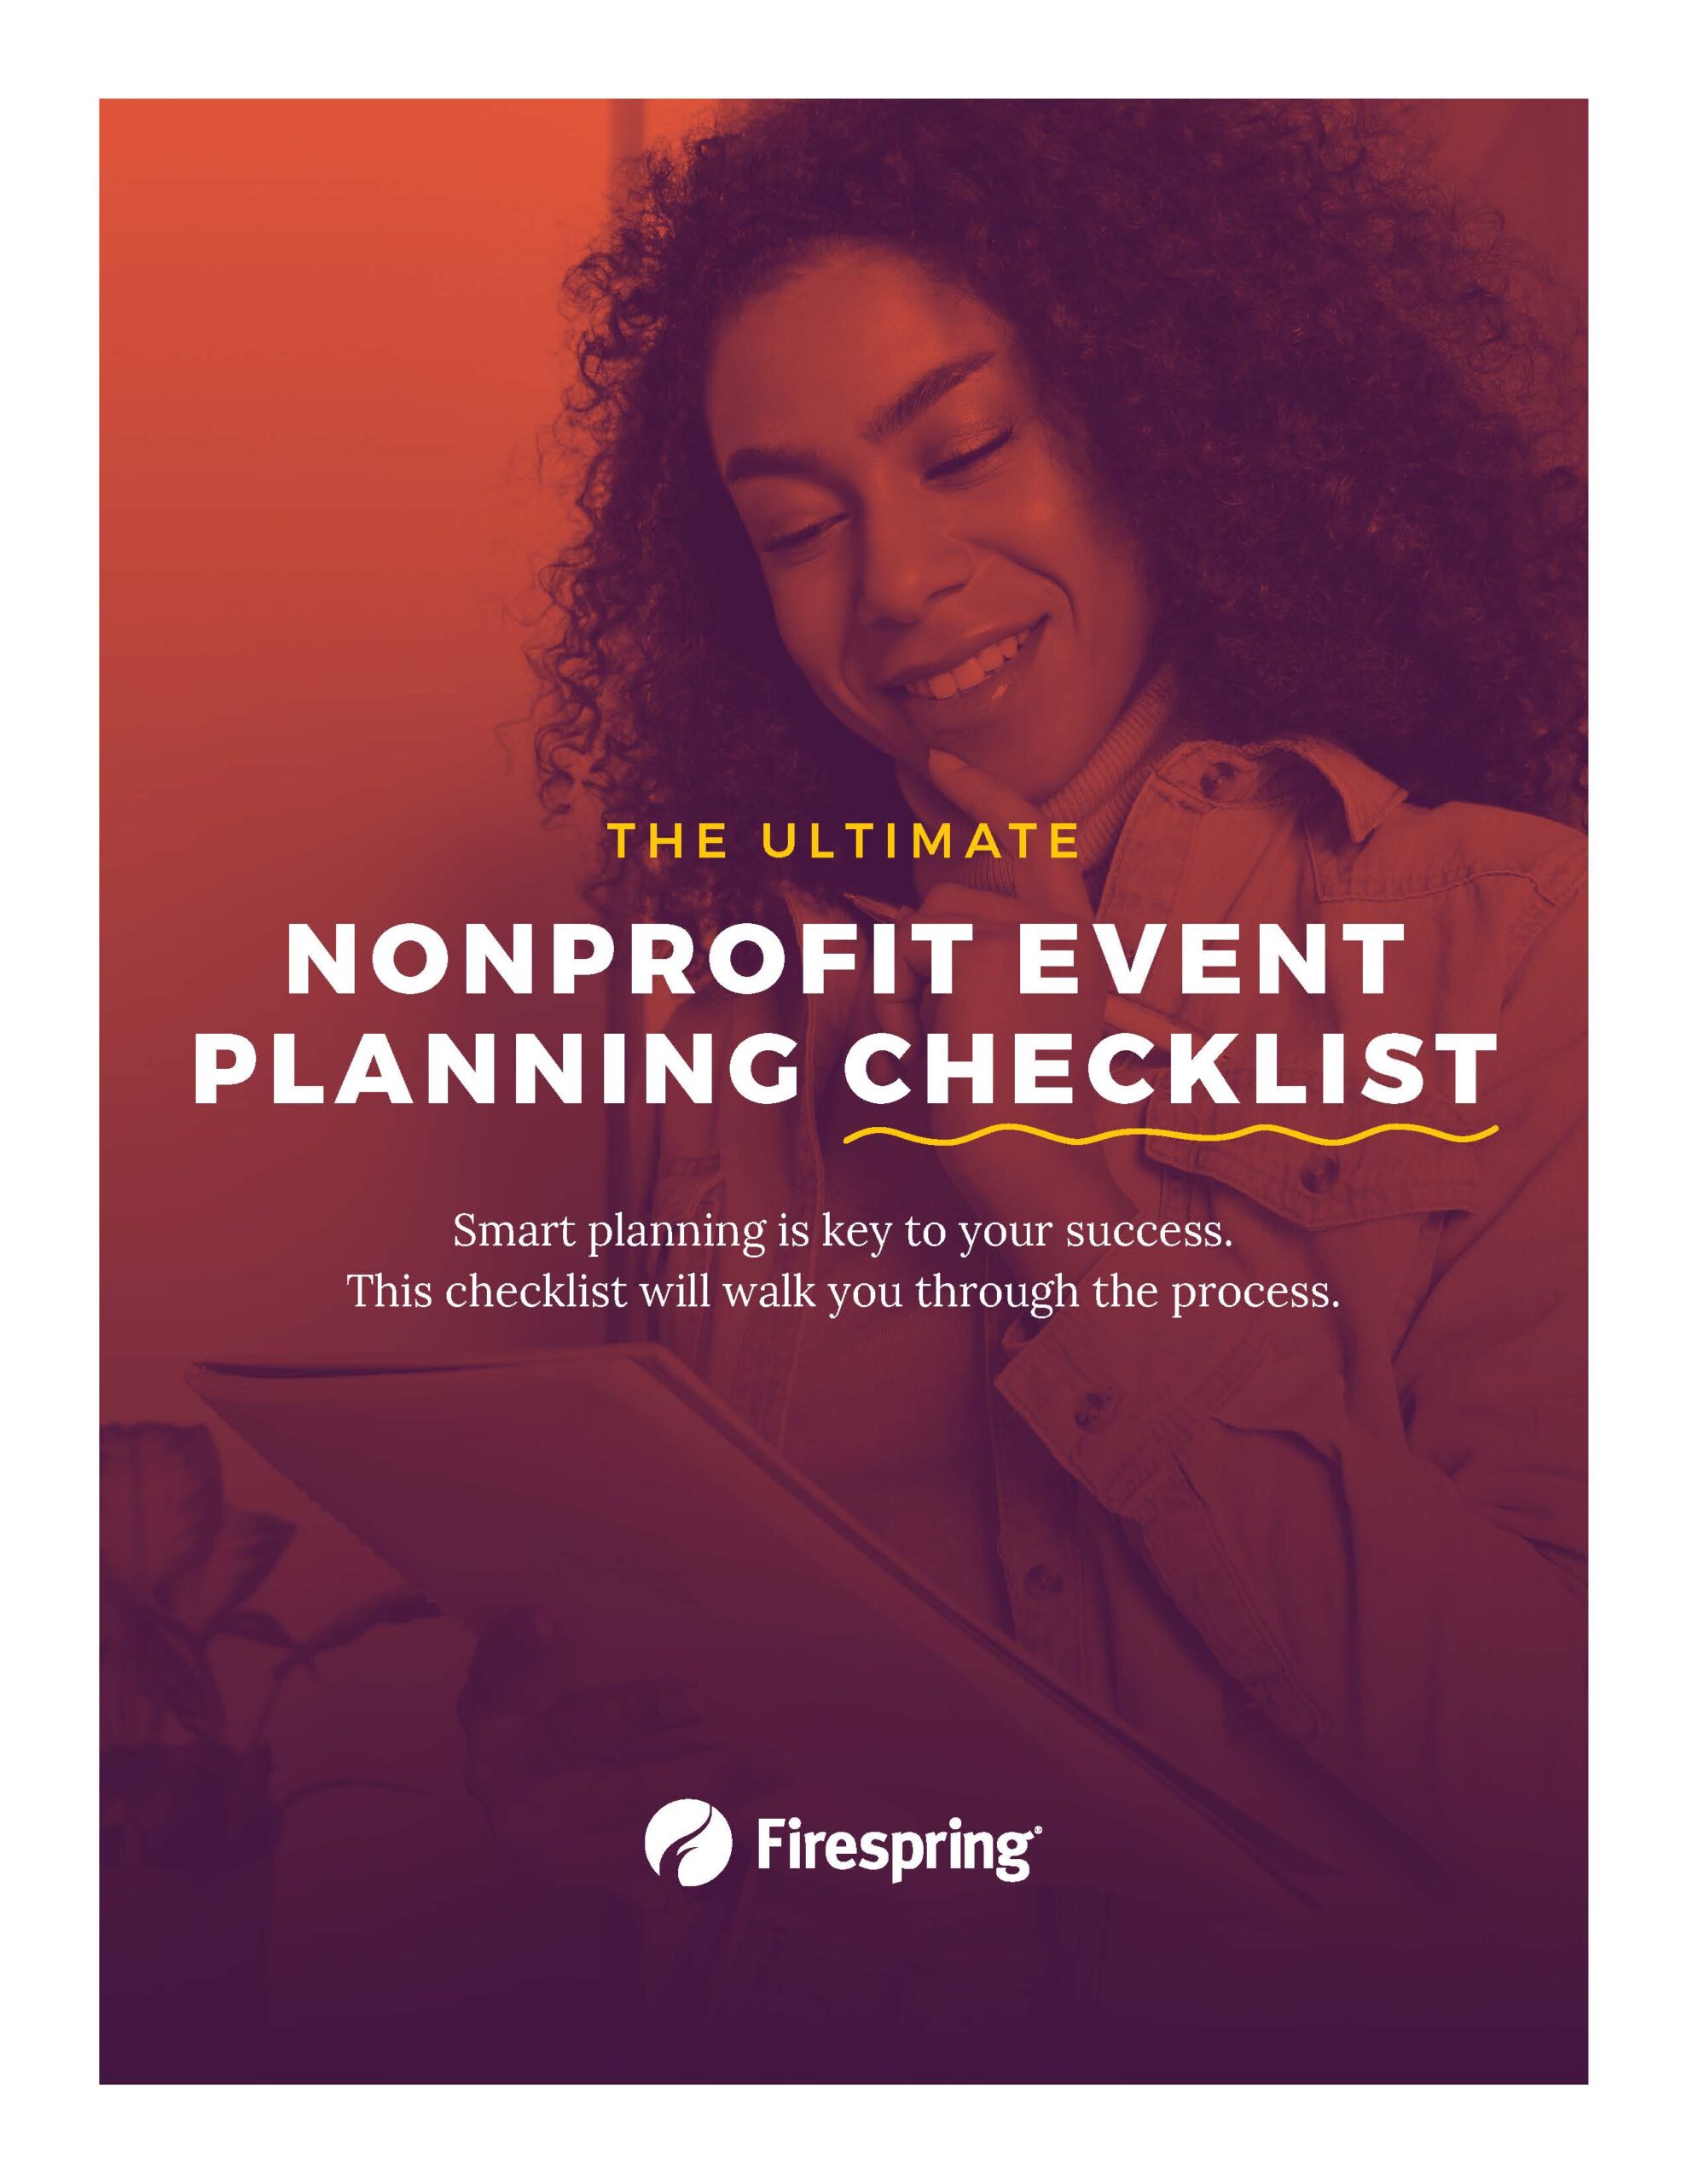 The Ultimate NonProfit Event Planning Checklist